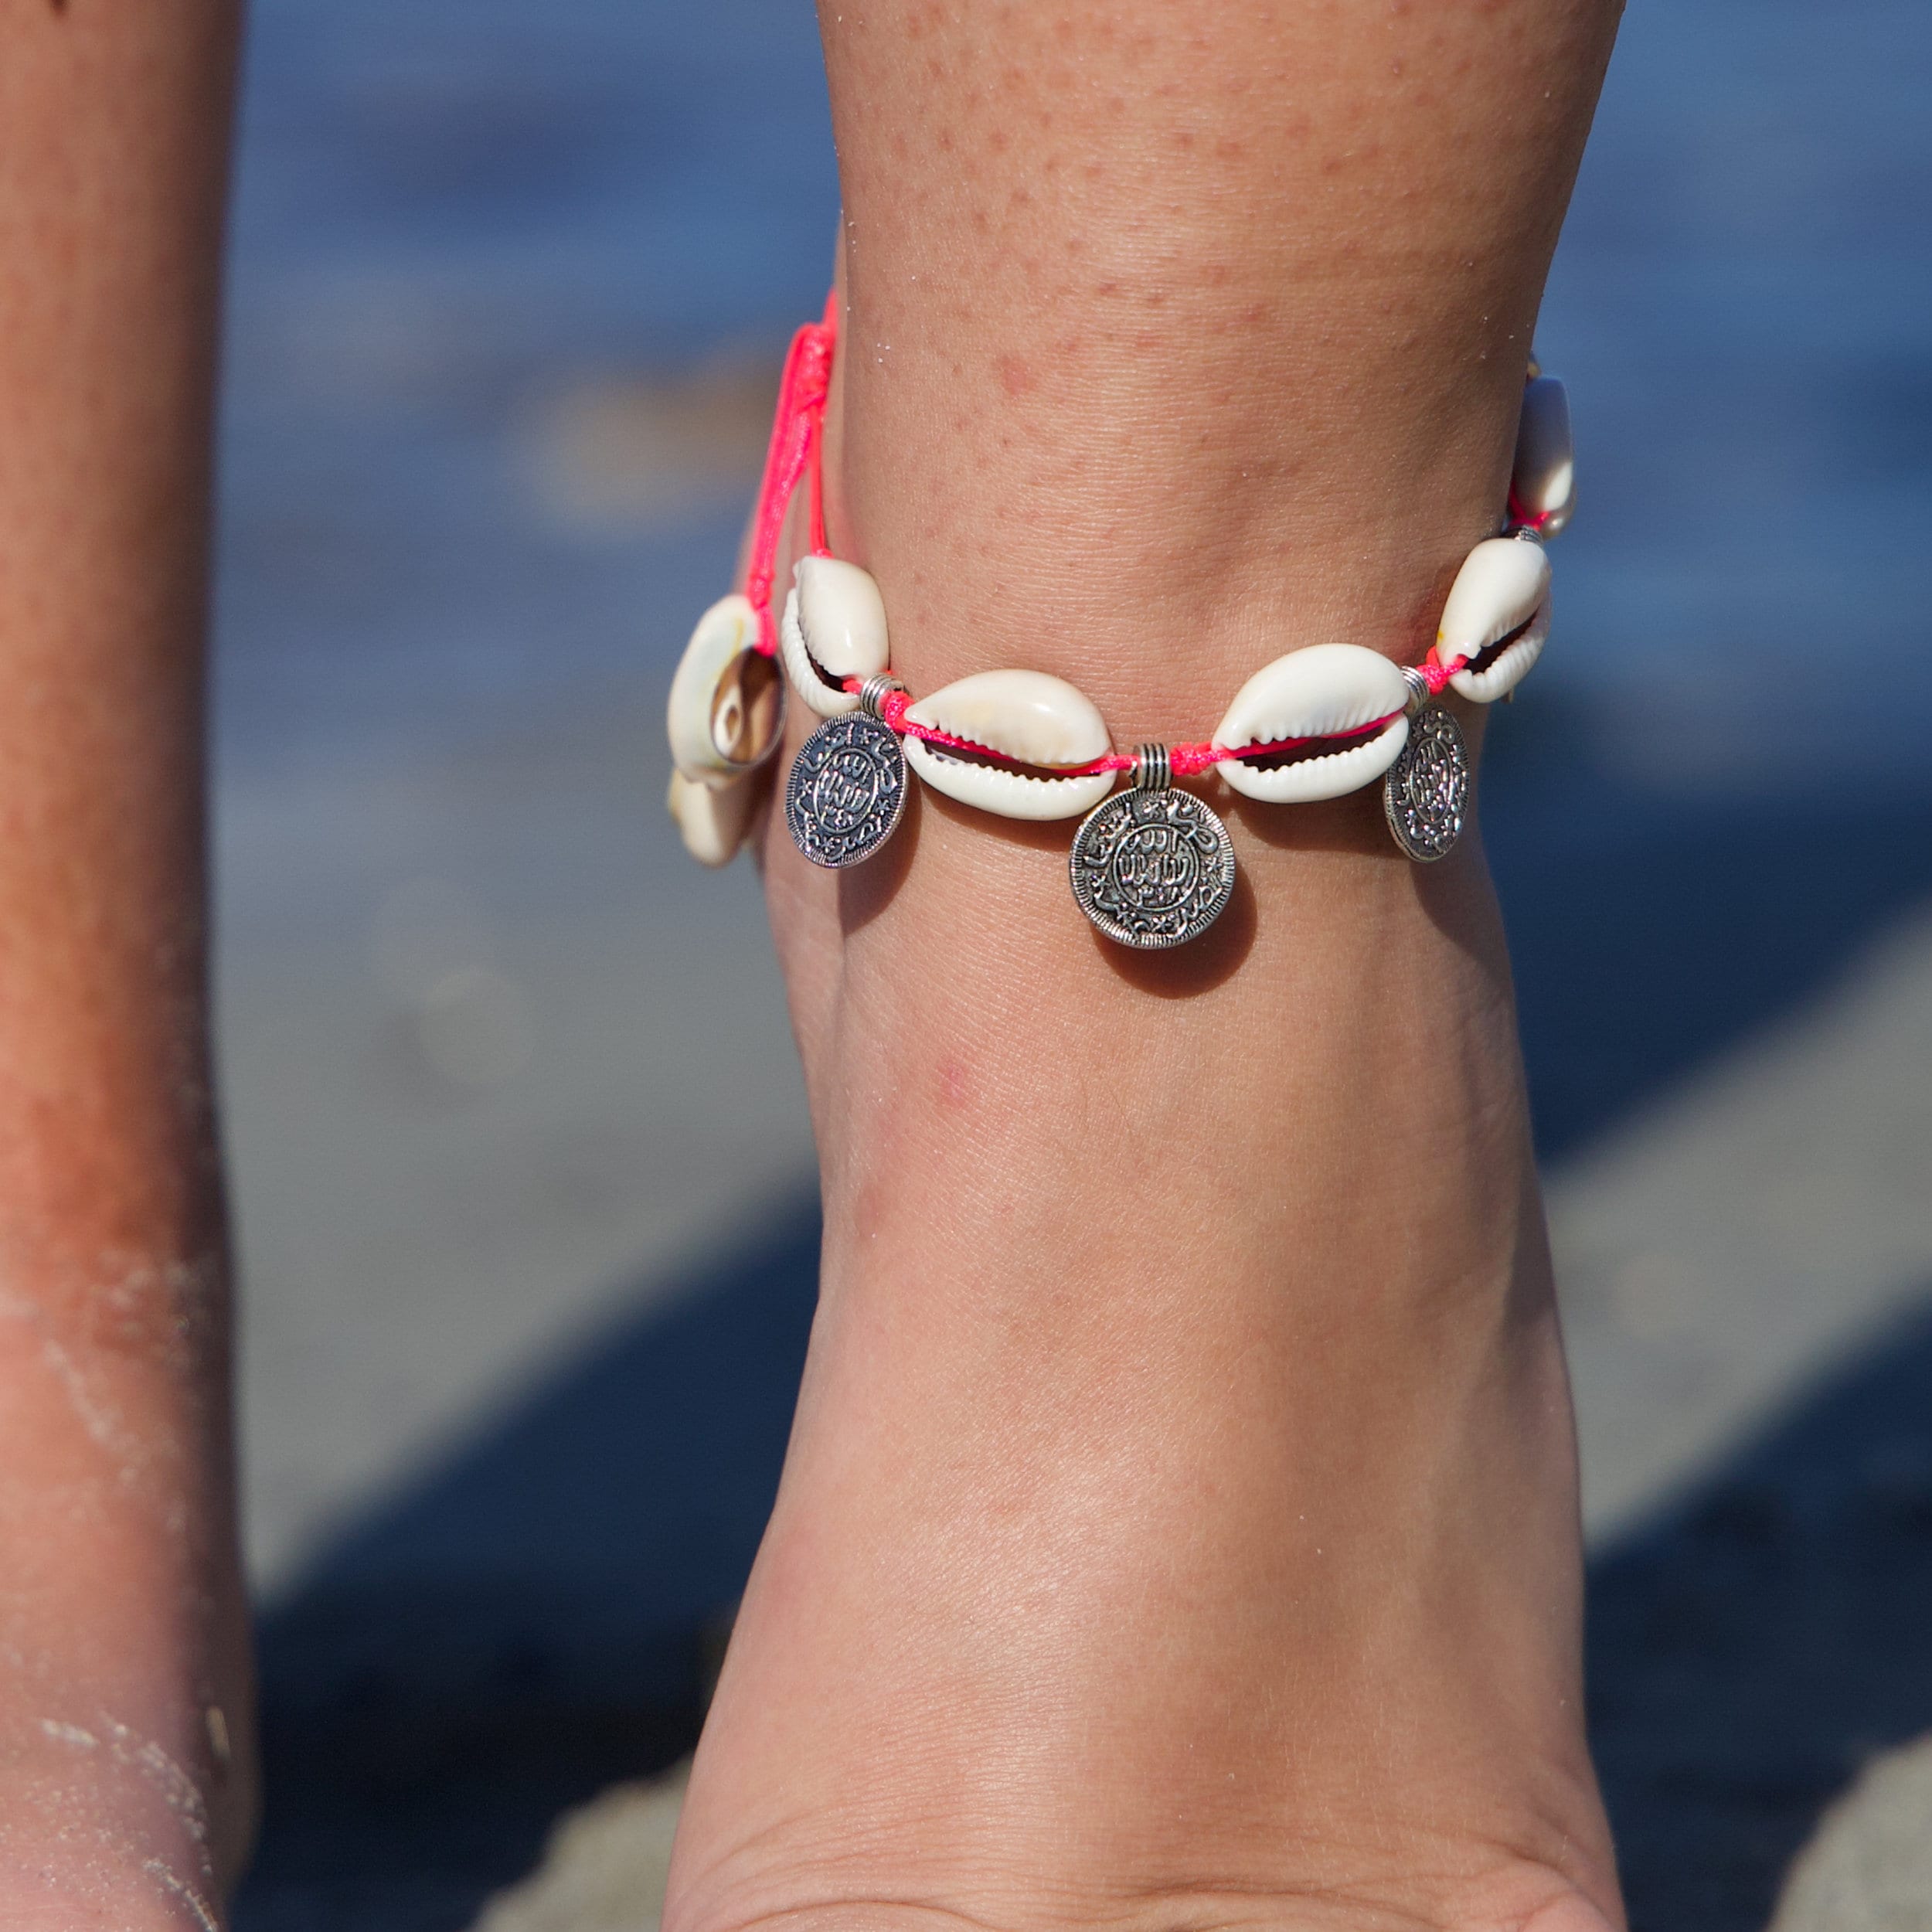 Ankle Bracelet in Cauri Shells and Coins on Neon Pink Link / - Etsy